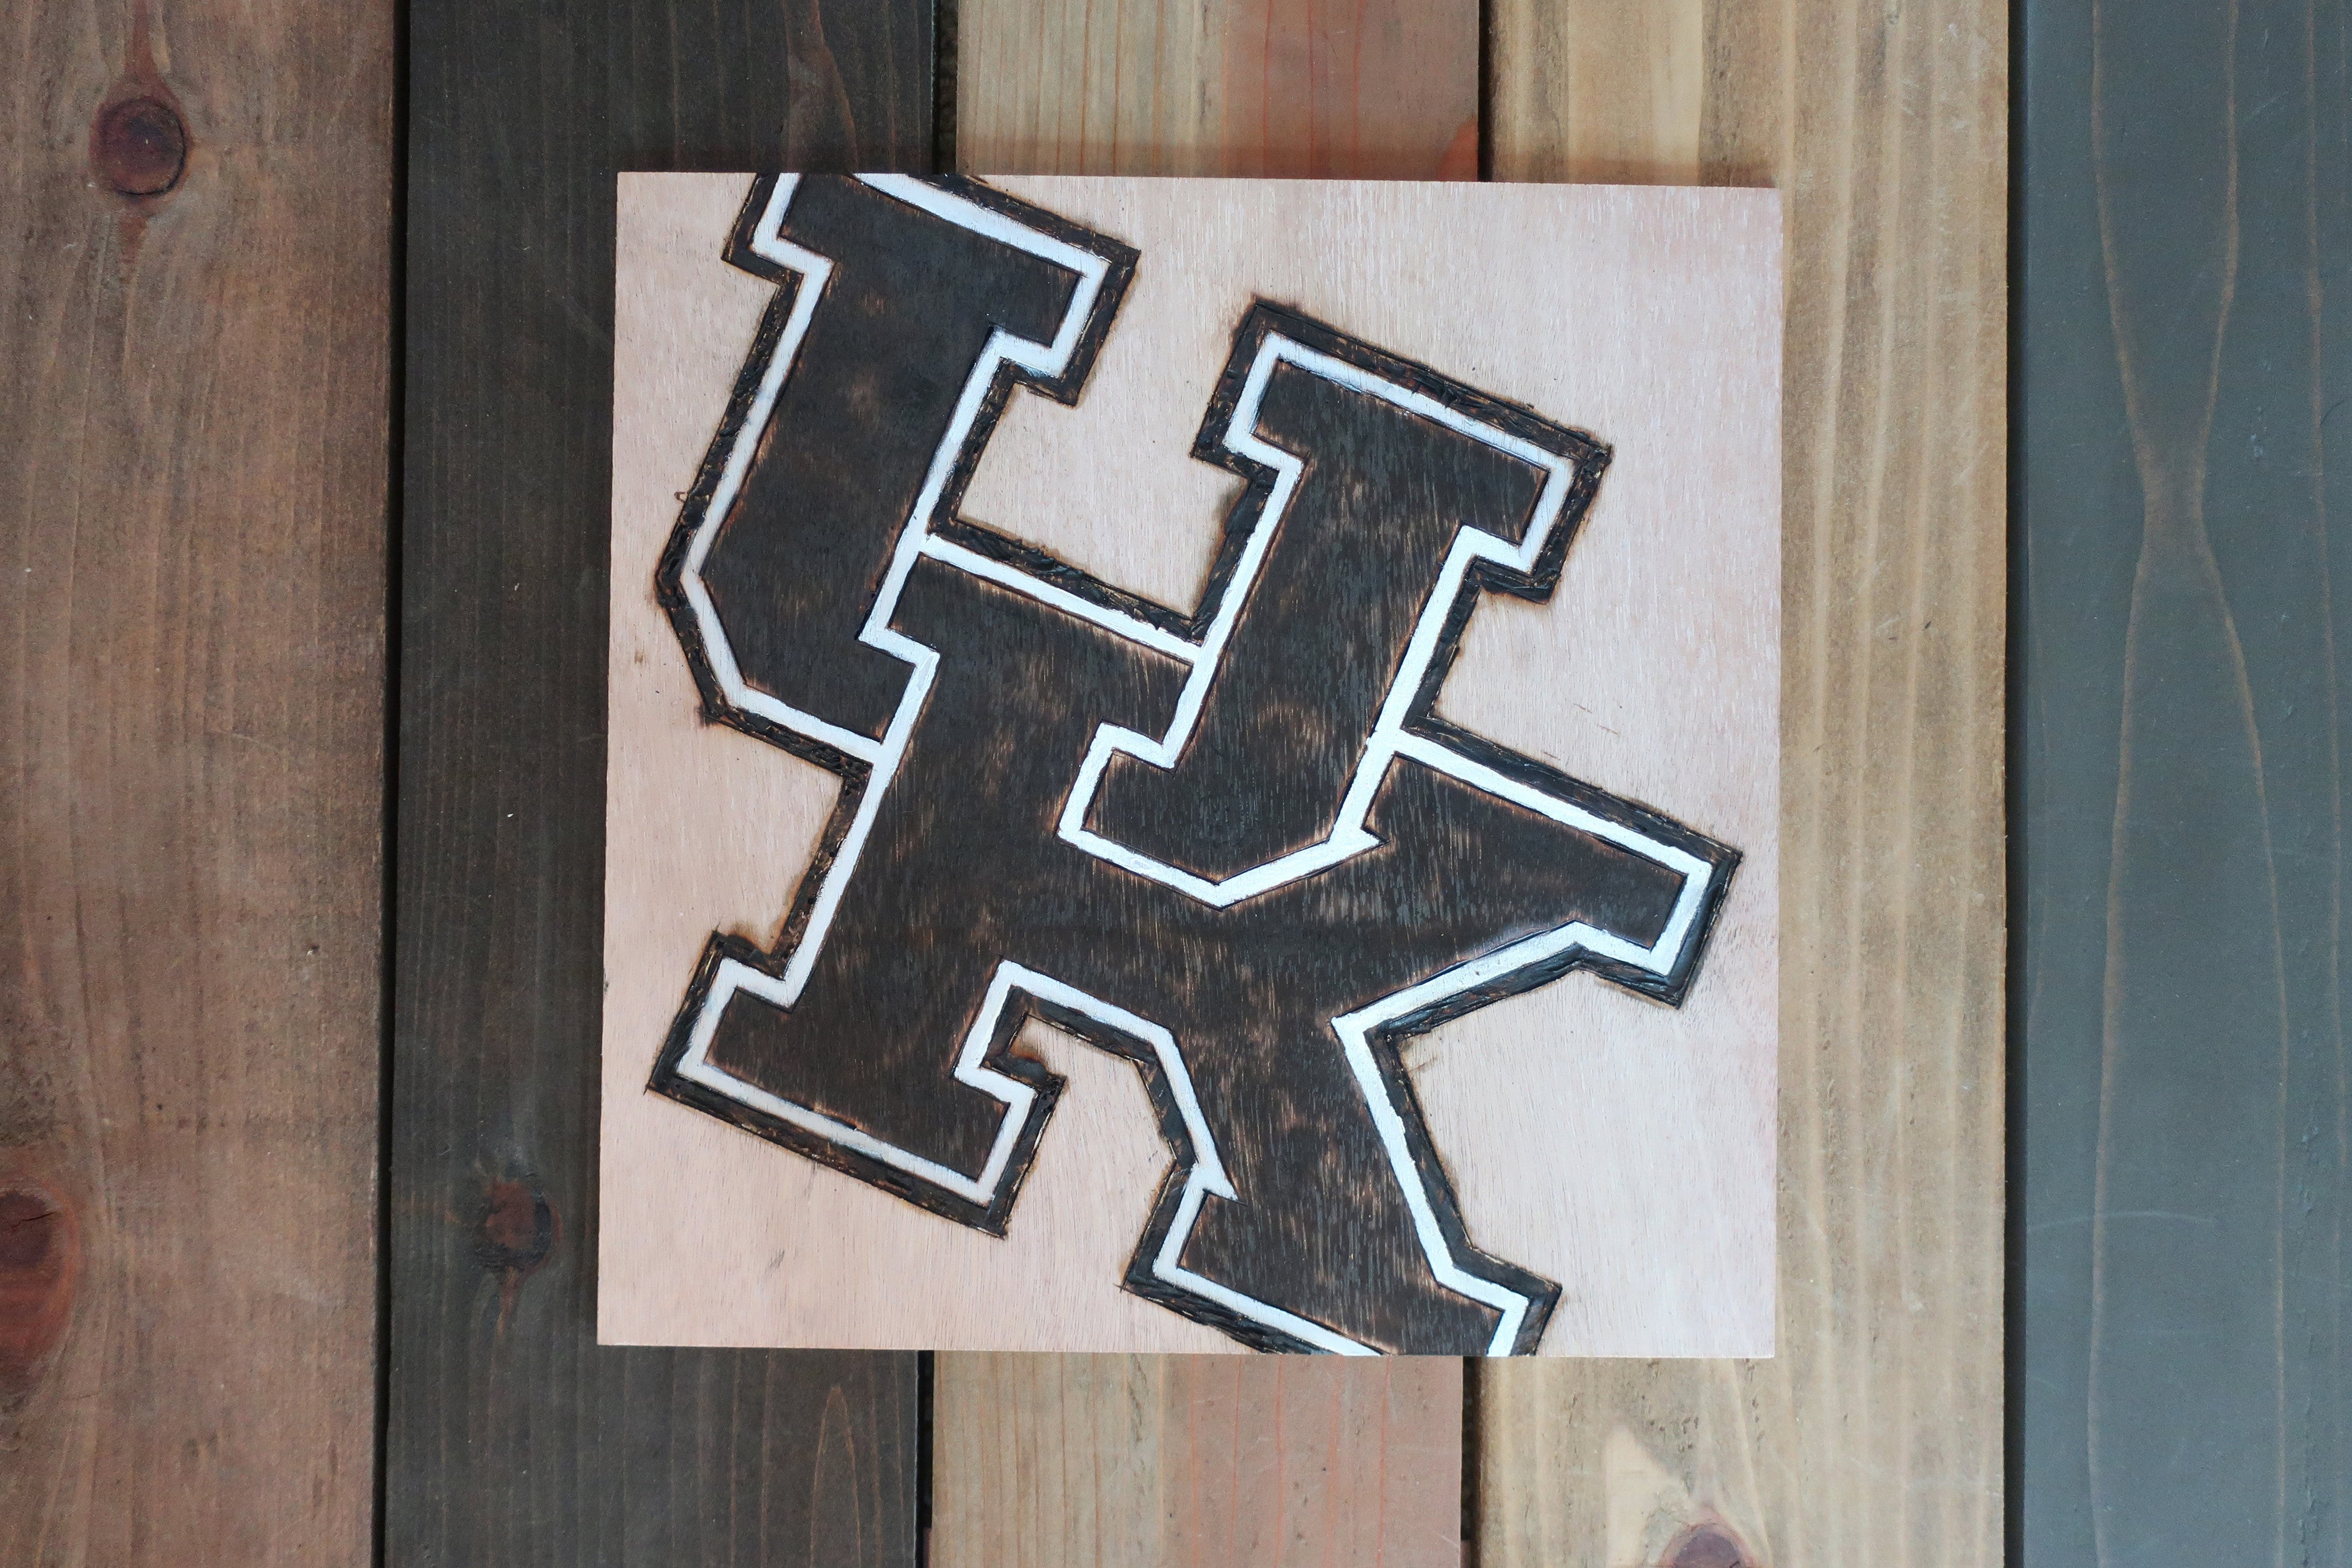 How to Use a Stencil to Burn Letters on Wood (Step-By-Step)